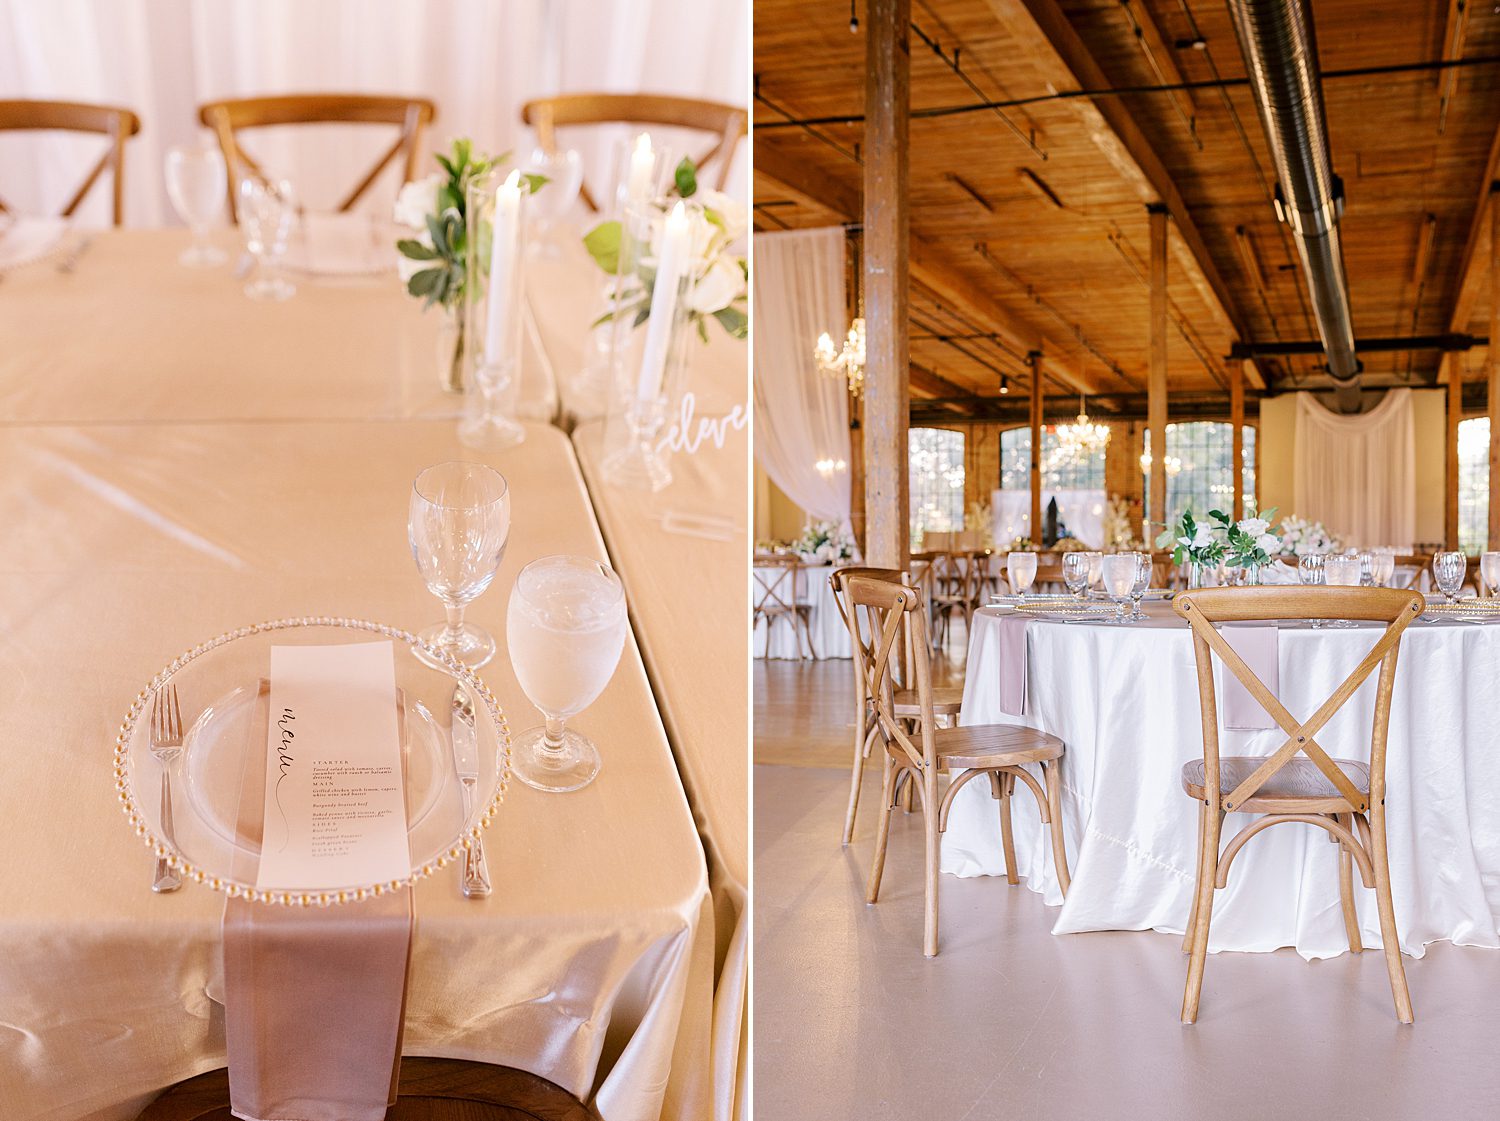 wedding reception inside The Bibb Mill Event Center with Italian inspired details